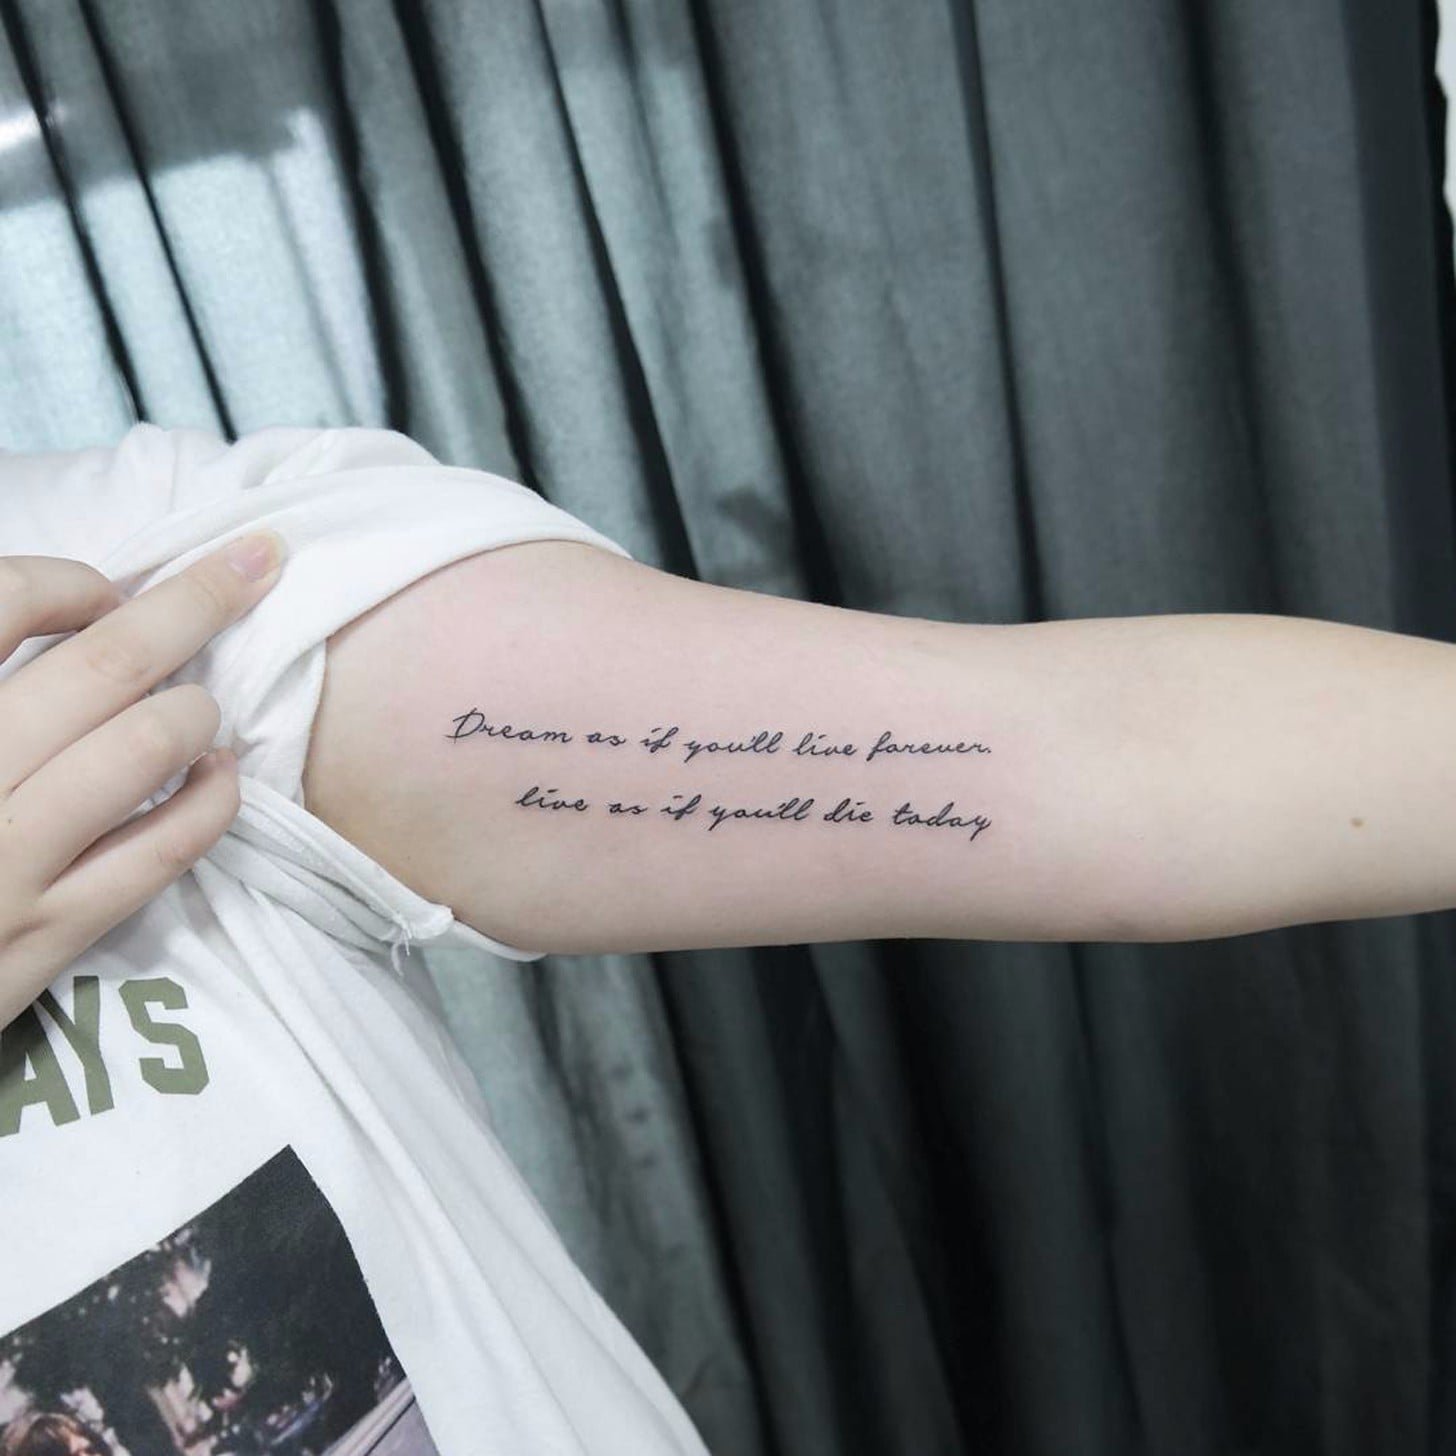 family quotes and sayings tattoos